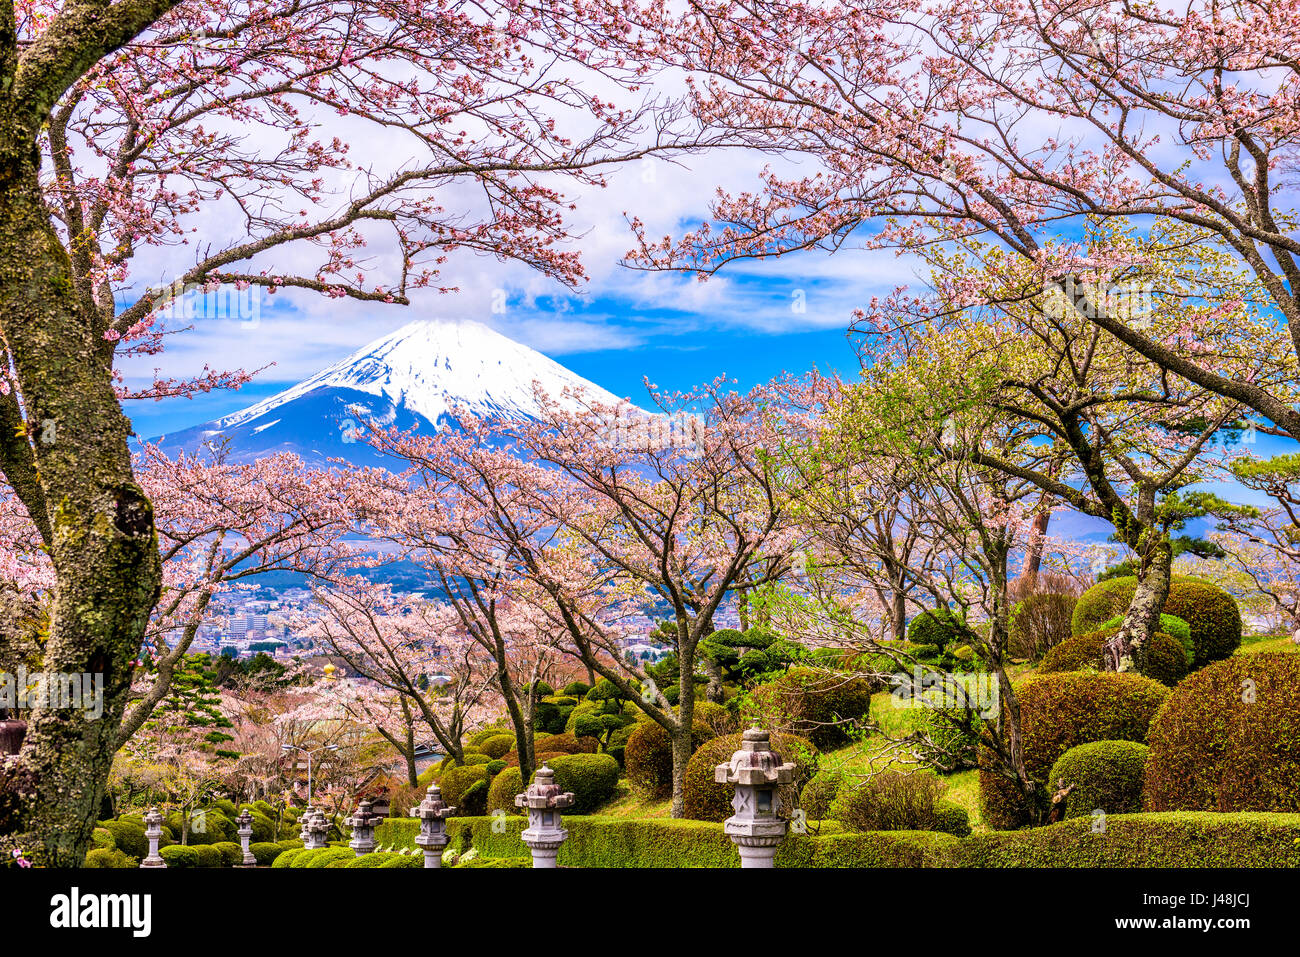 Gotemba City, Japan at Peace Park with Mt. Fuji in spring season. Stock Photo